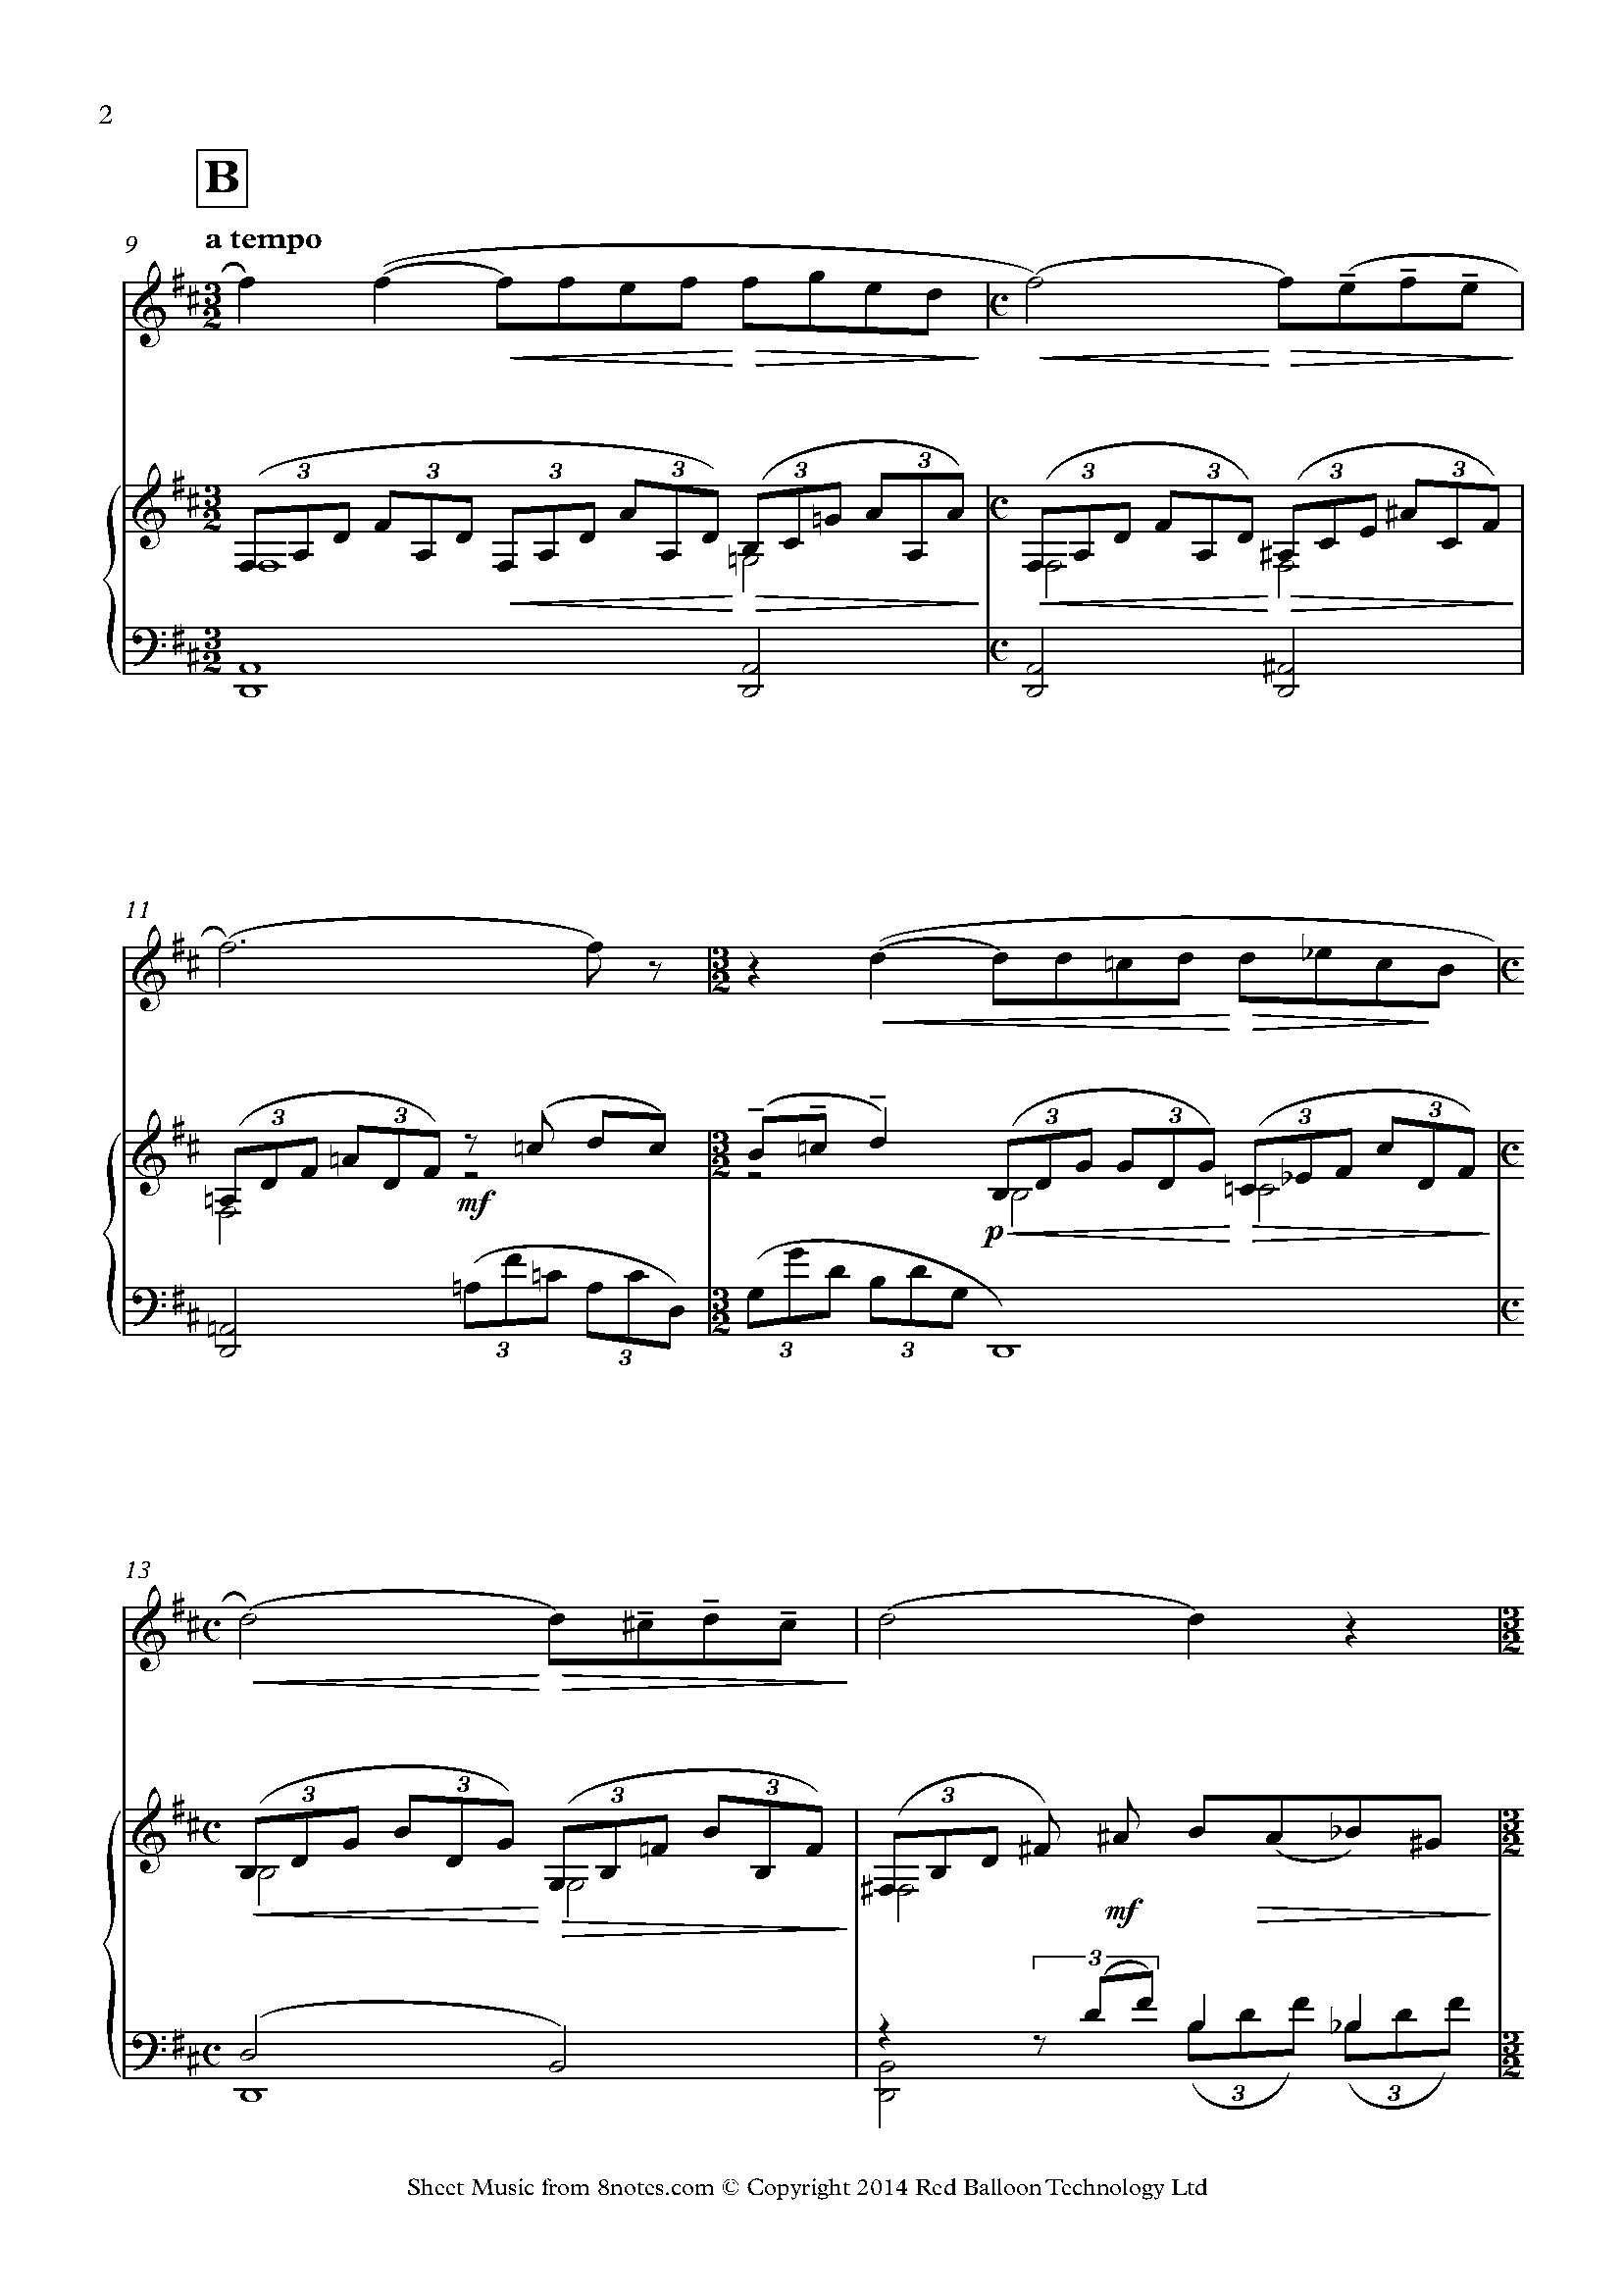 Rachmaninoff - Theme from Concerto No. 2 2nd movement Sheet music for Violin - 8notes.com